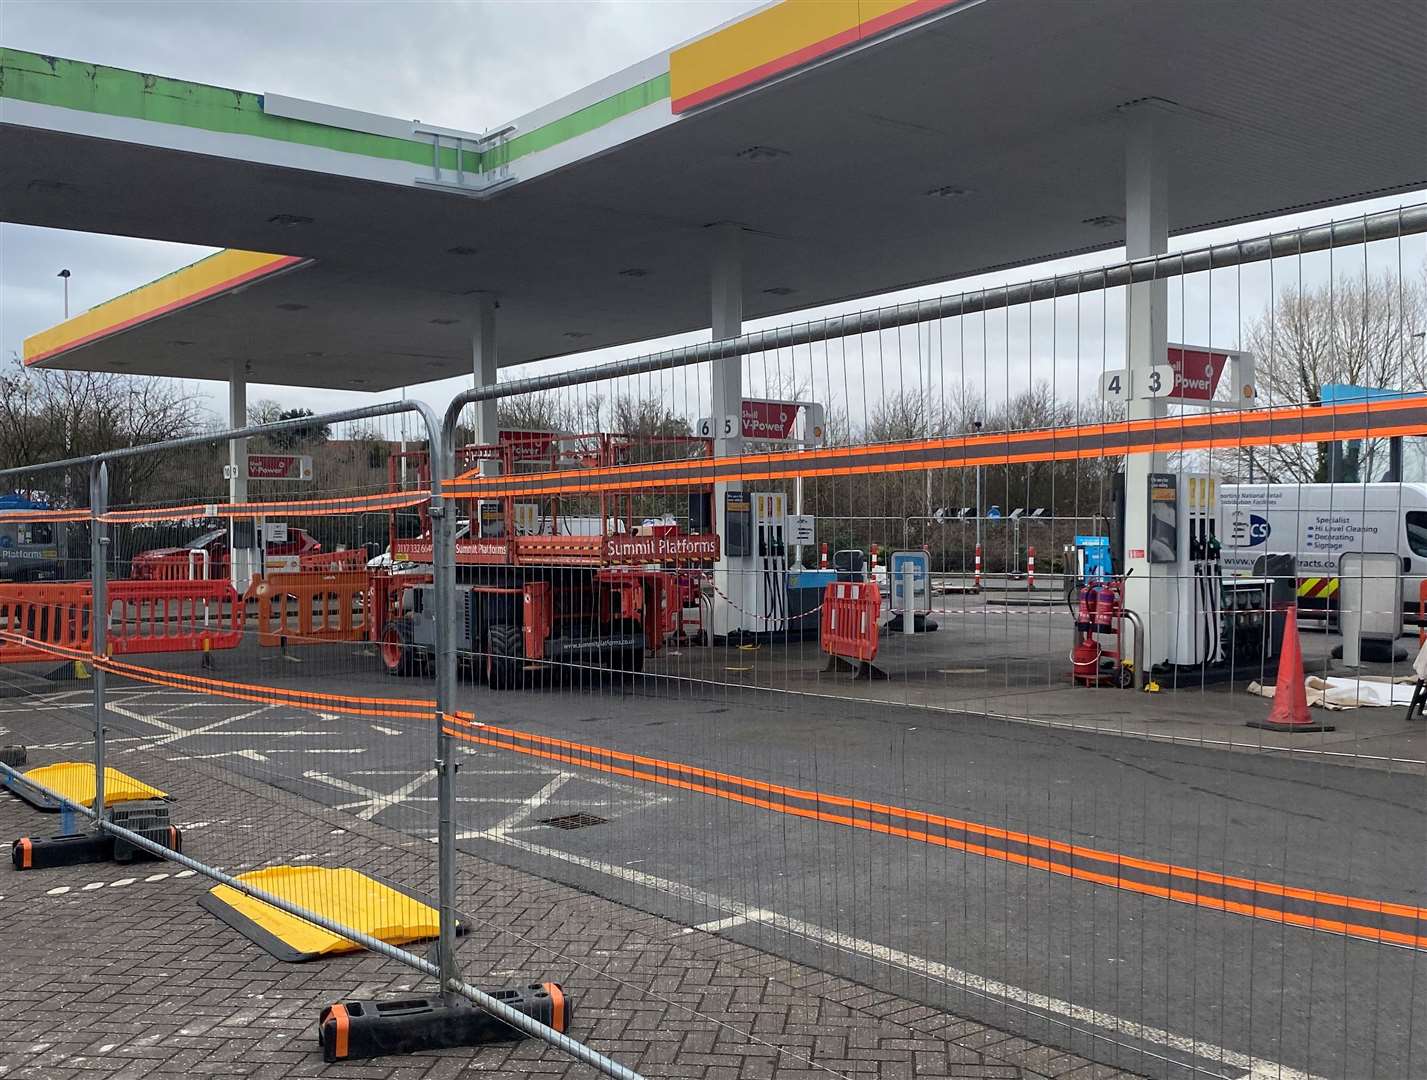 It is changing from a Co-op to a Shell garage